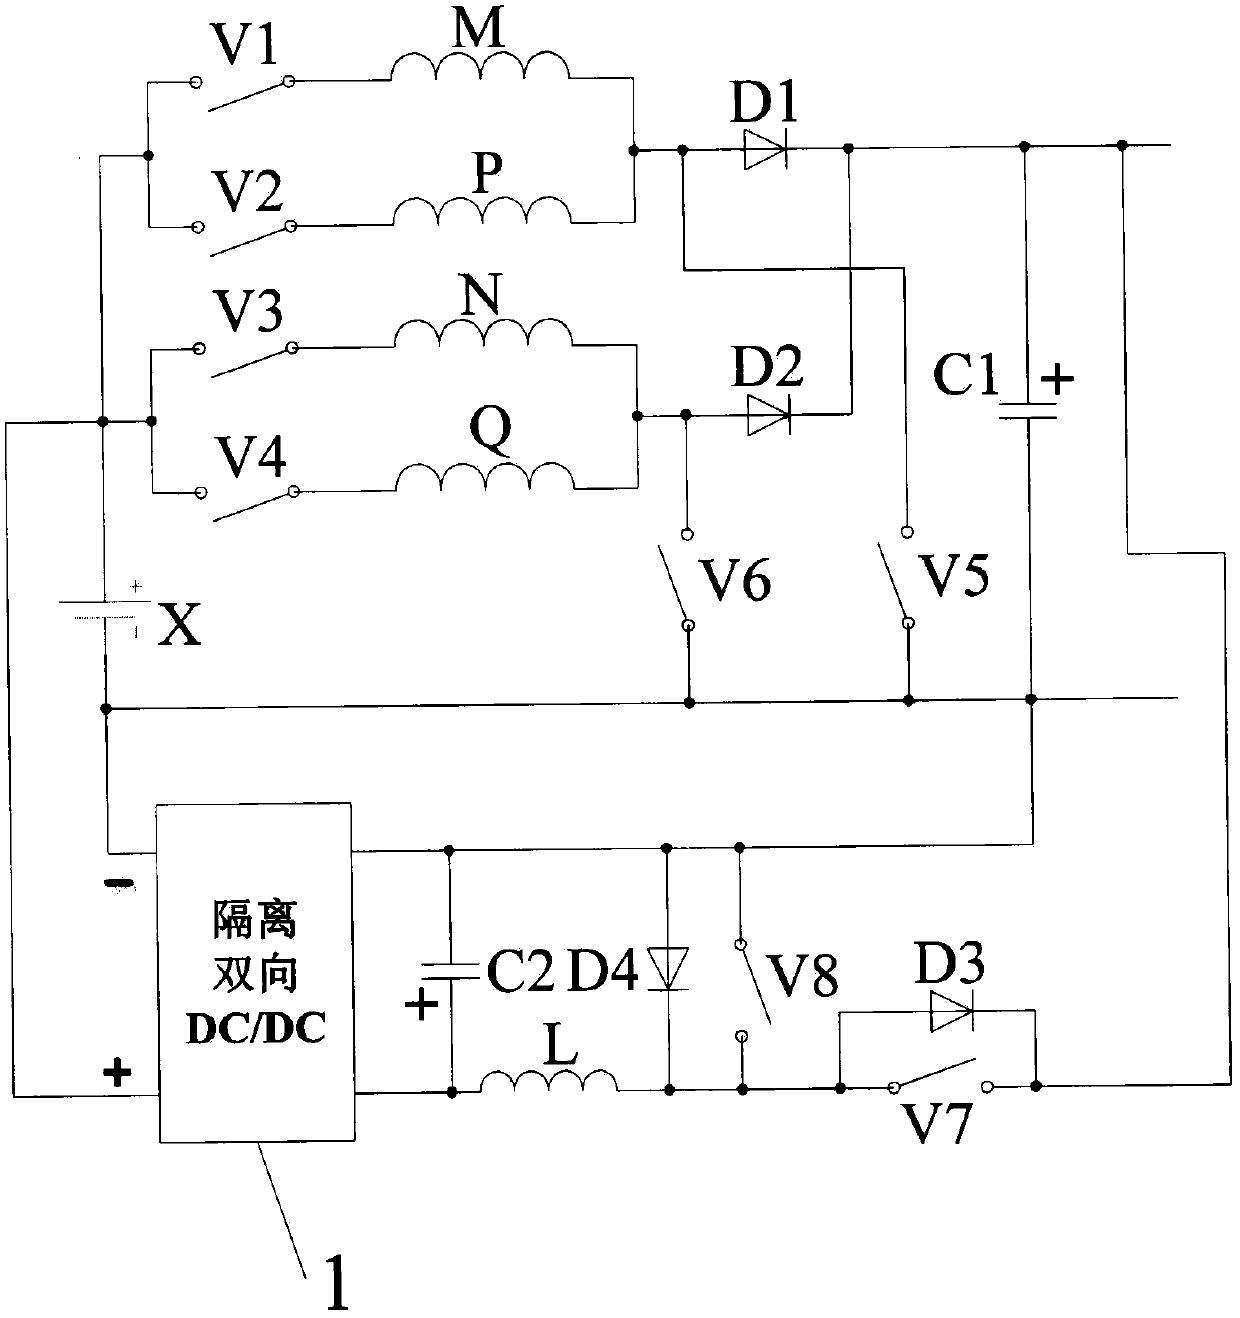 A four-phase switched reluctance motor power converter